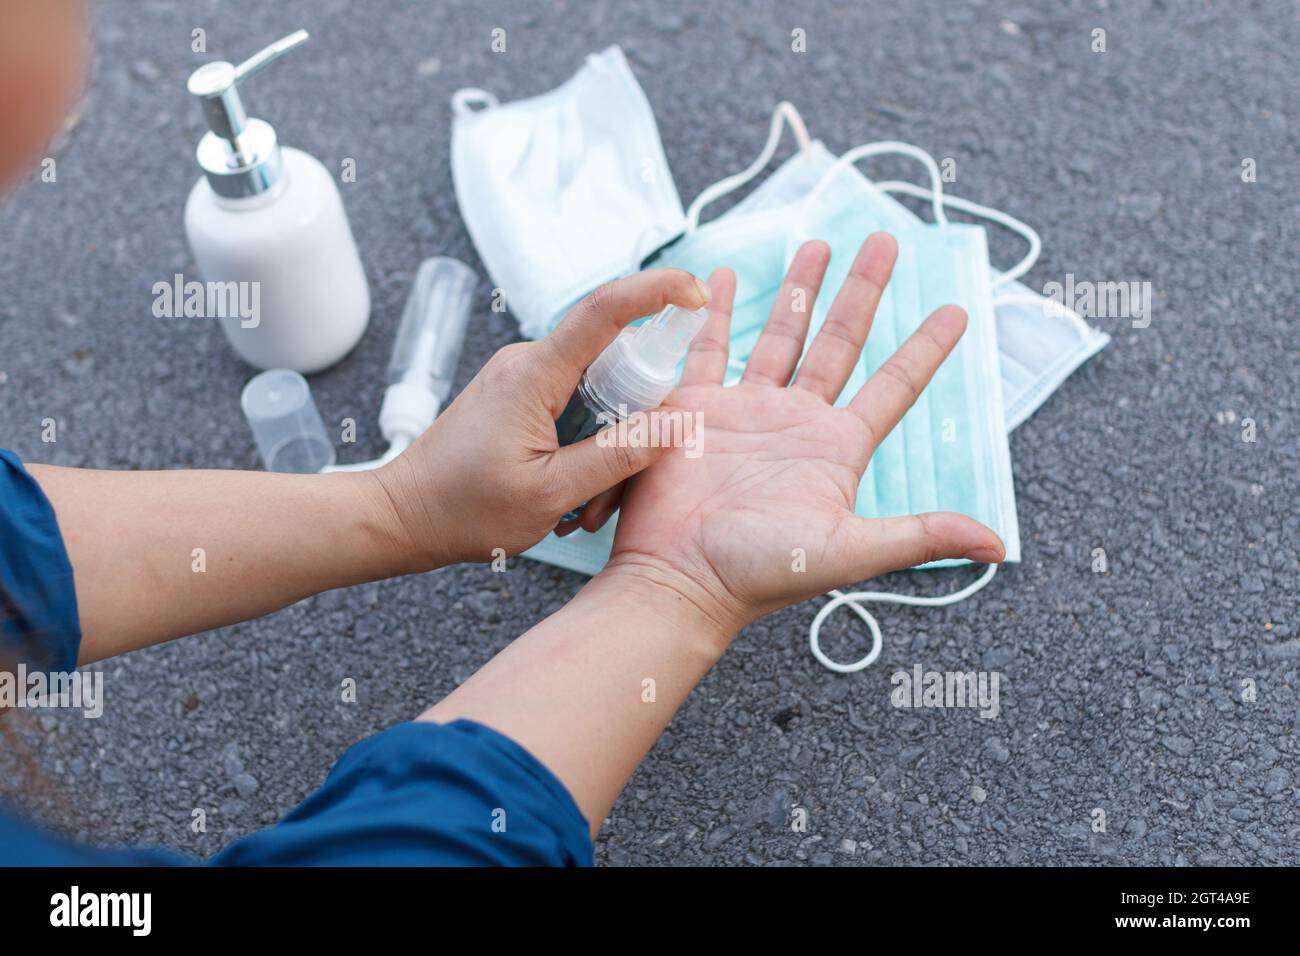 The Woman Use Alcohol To Clean Hands For Prevention Of Coronavirus Virus Outbreak. Coivd 19 Stock Photo